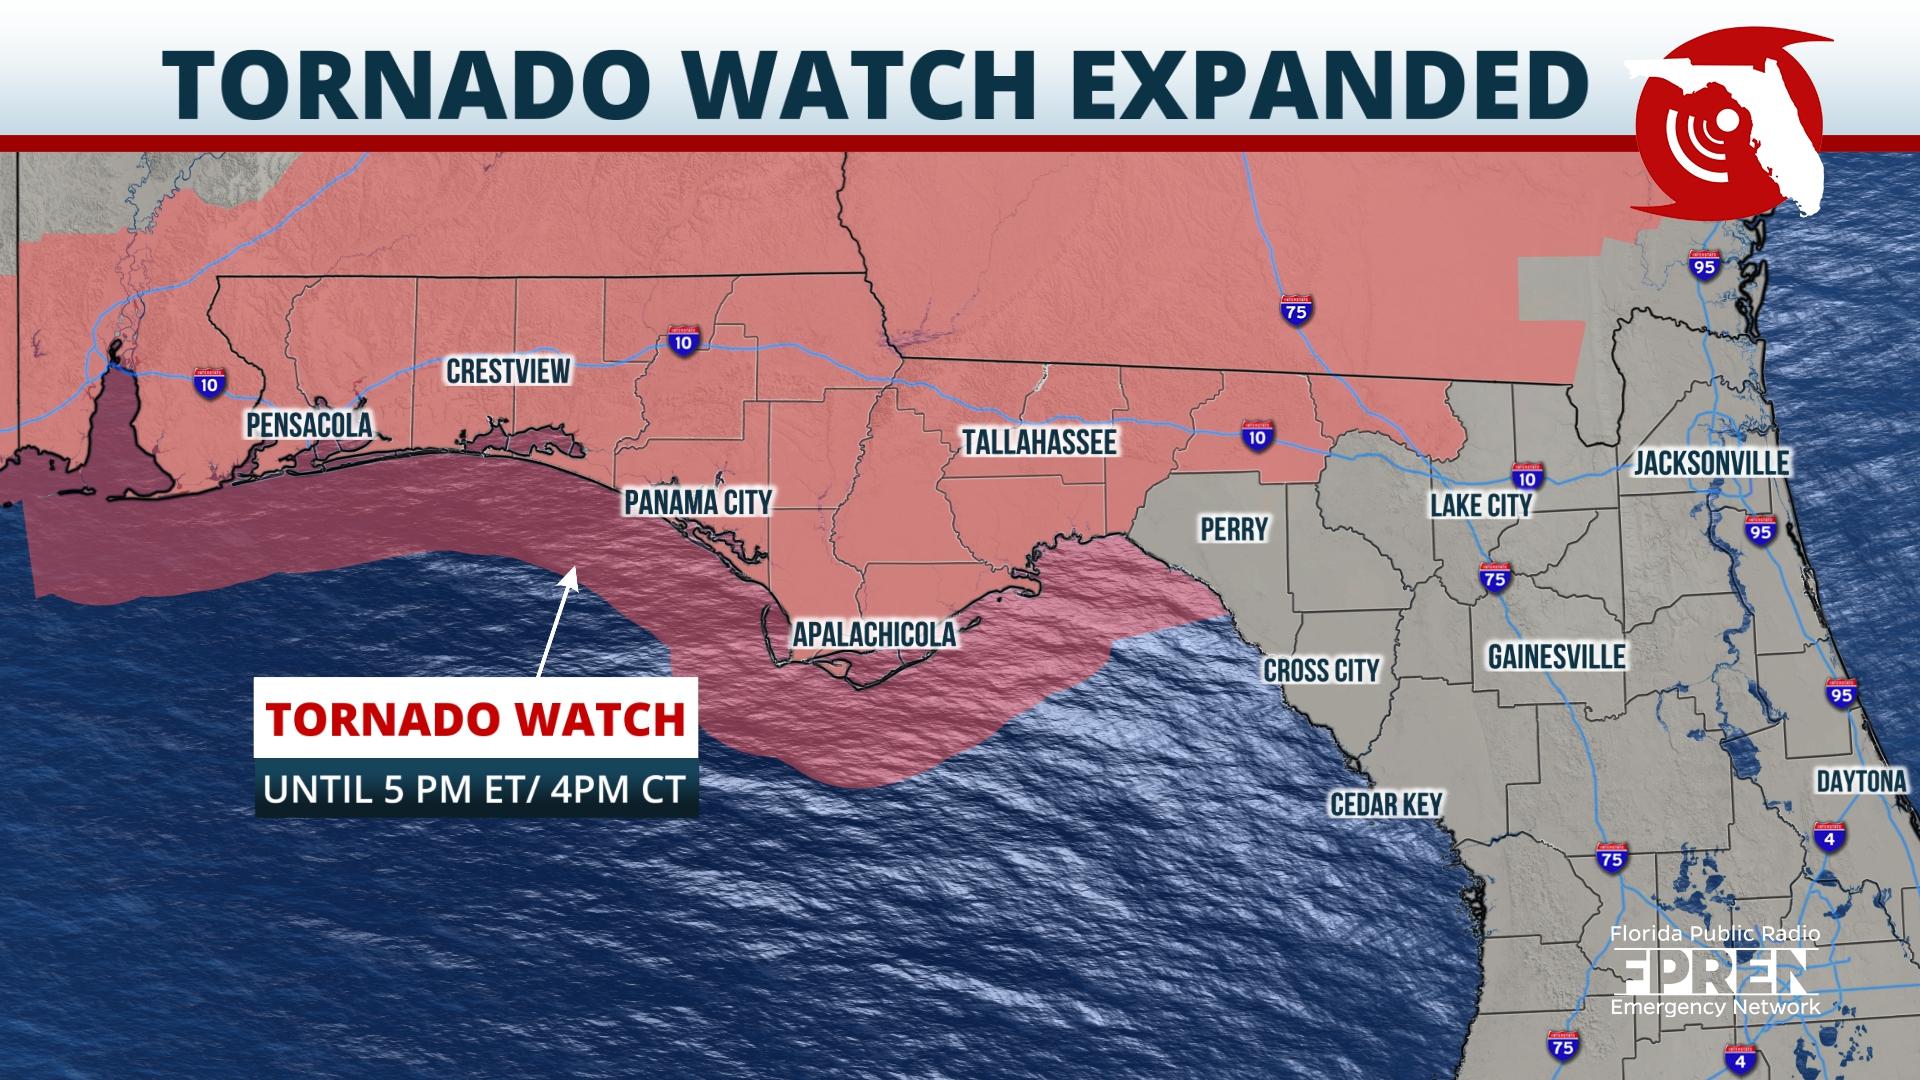 Tornado Watch for All of Florida Panhandle through Thursday Afternoon